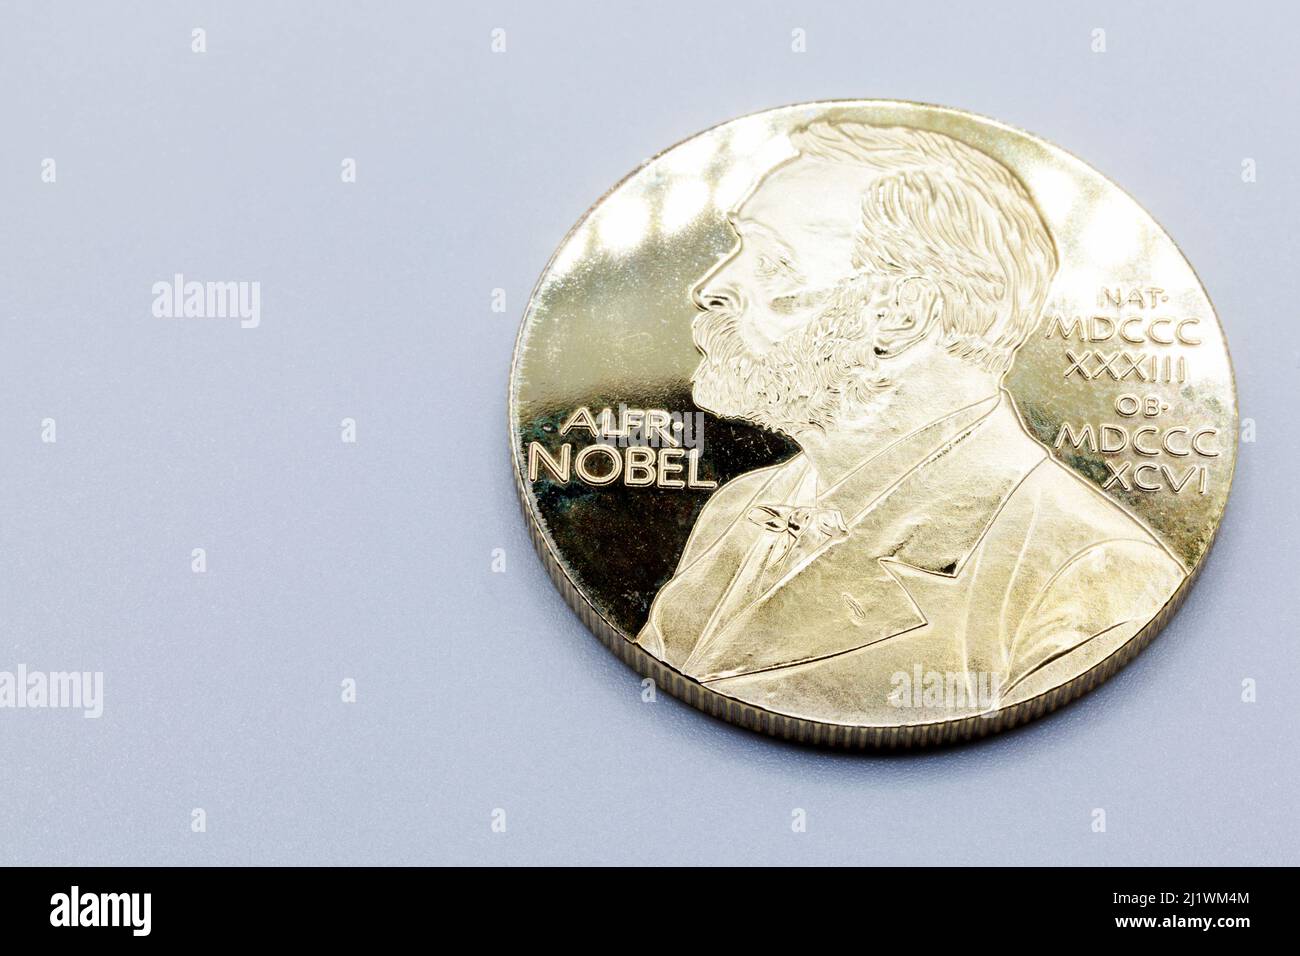 replica of the Nobel Prize on a gray background Stock Photo